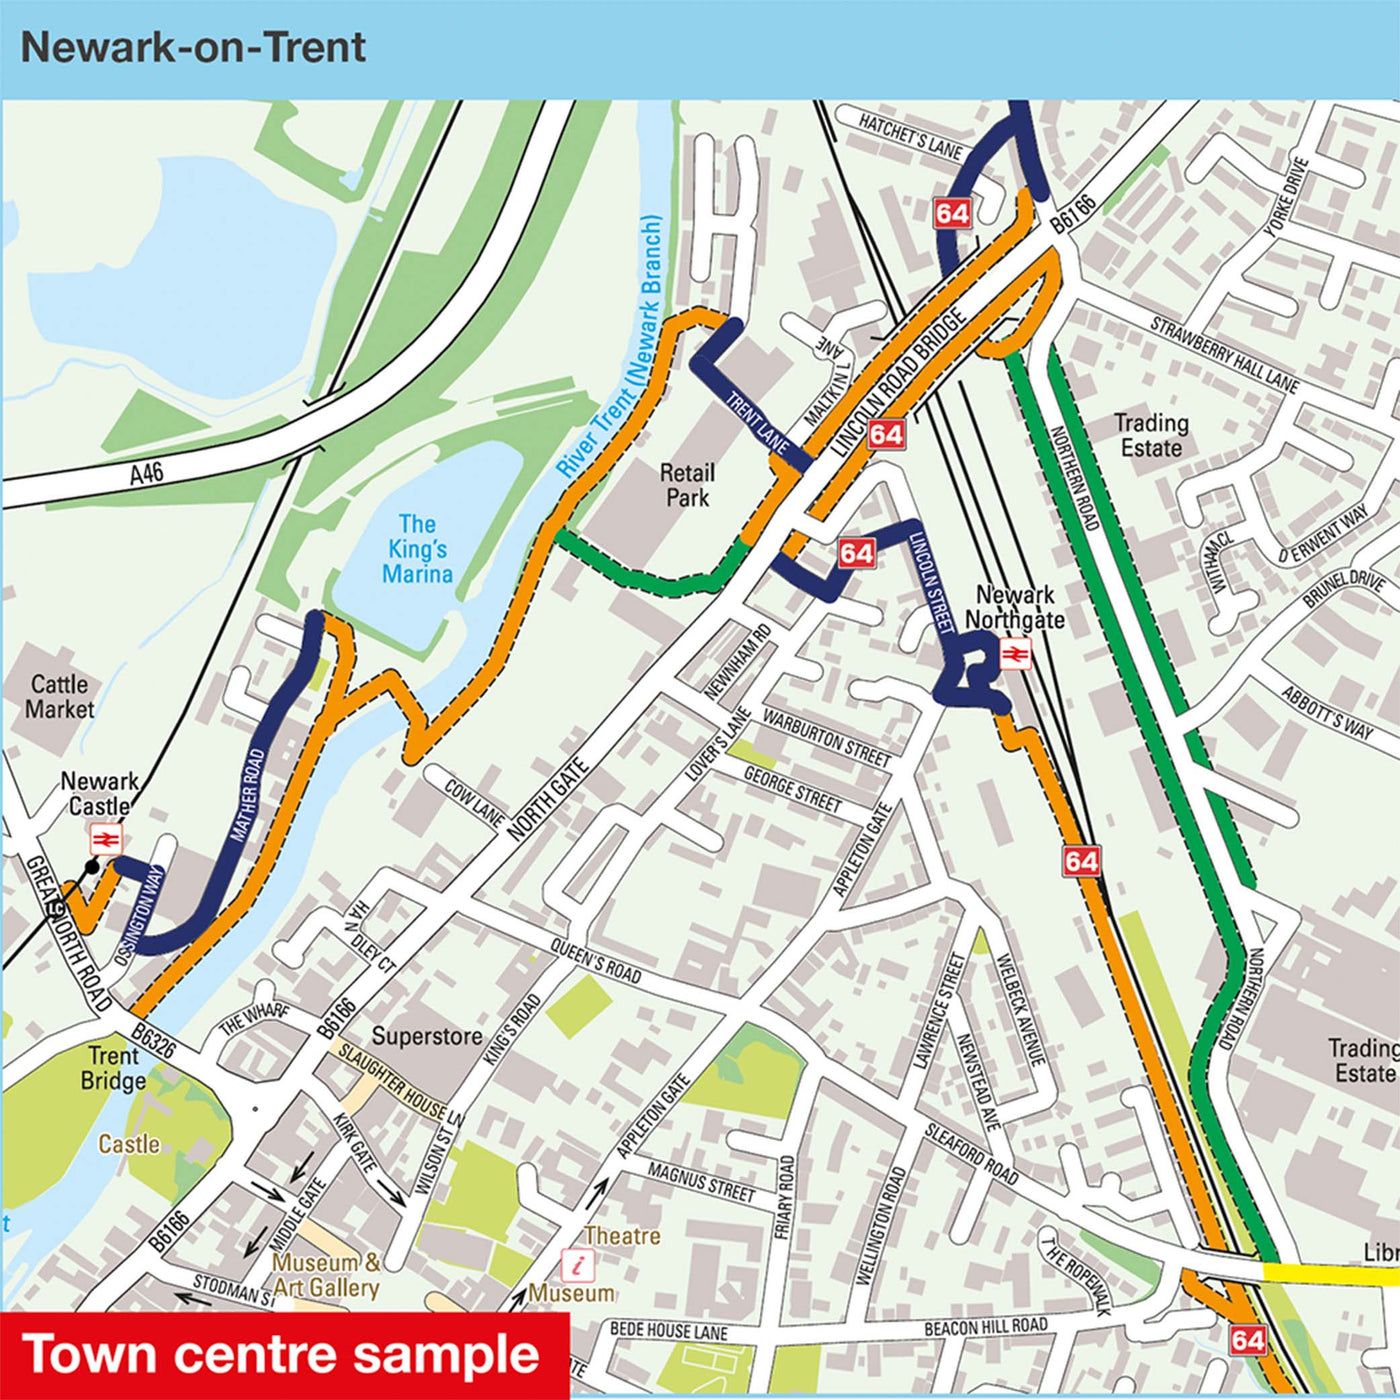 Town centre sample: Newark-on-Trent, featuring route 64